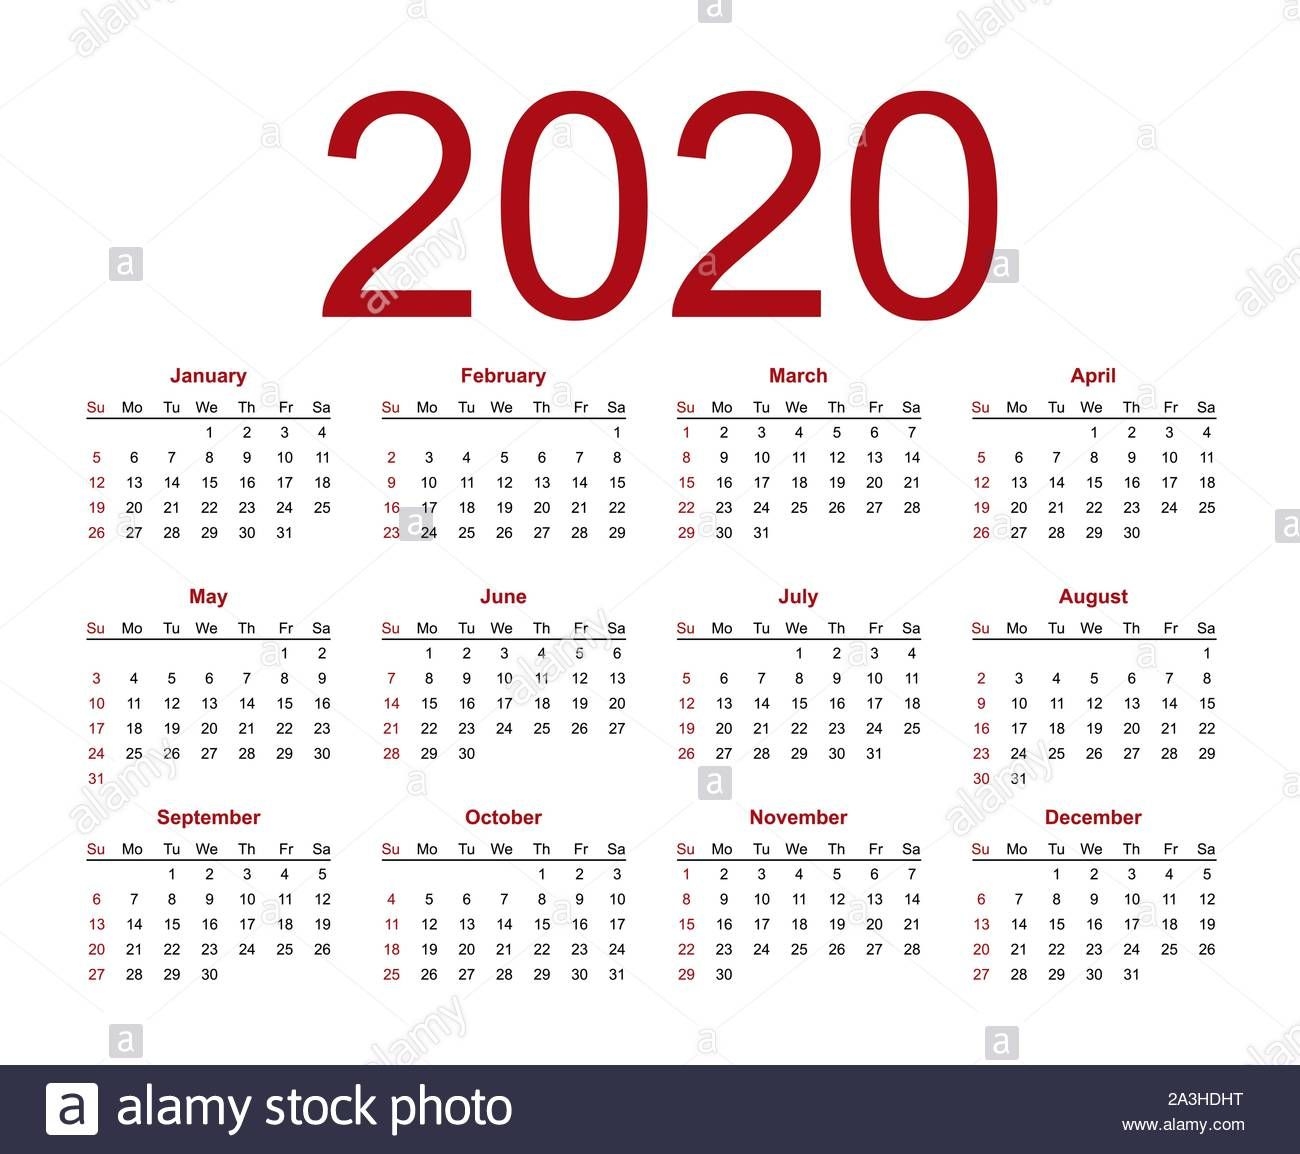 Calendar Template For 2020 Year Week Starts From Sunday